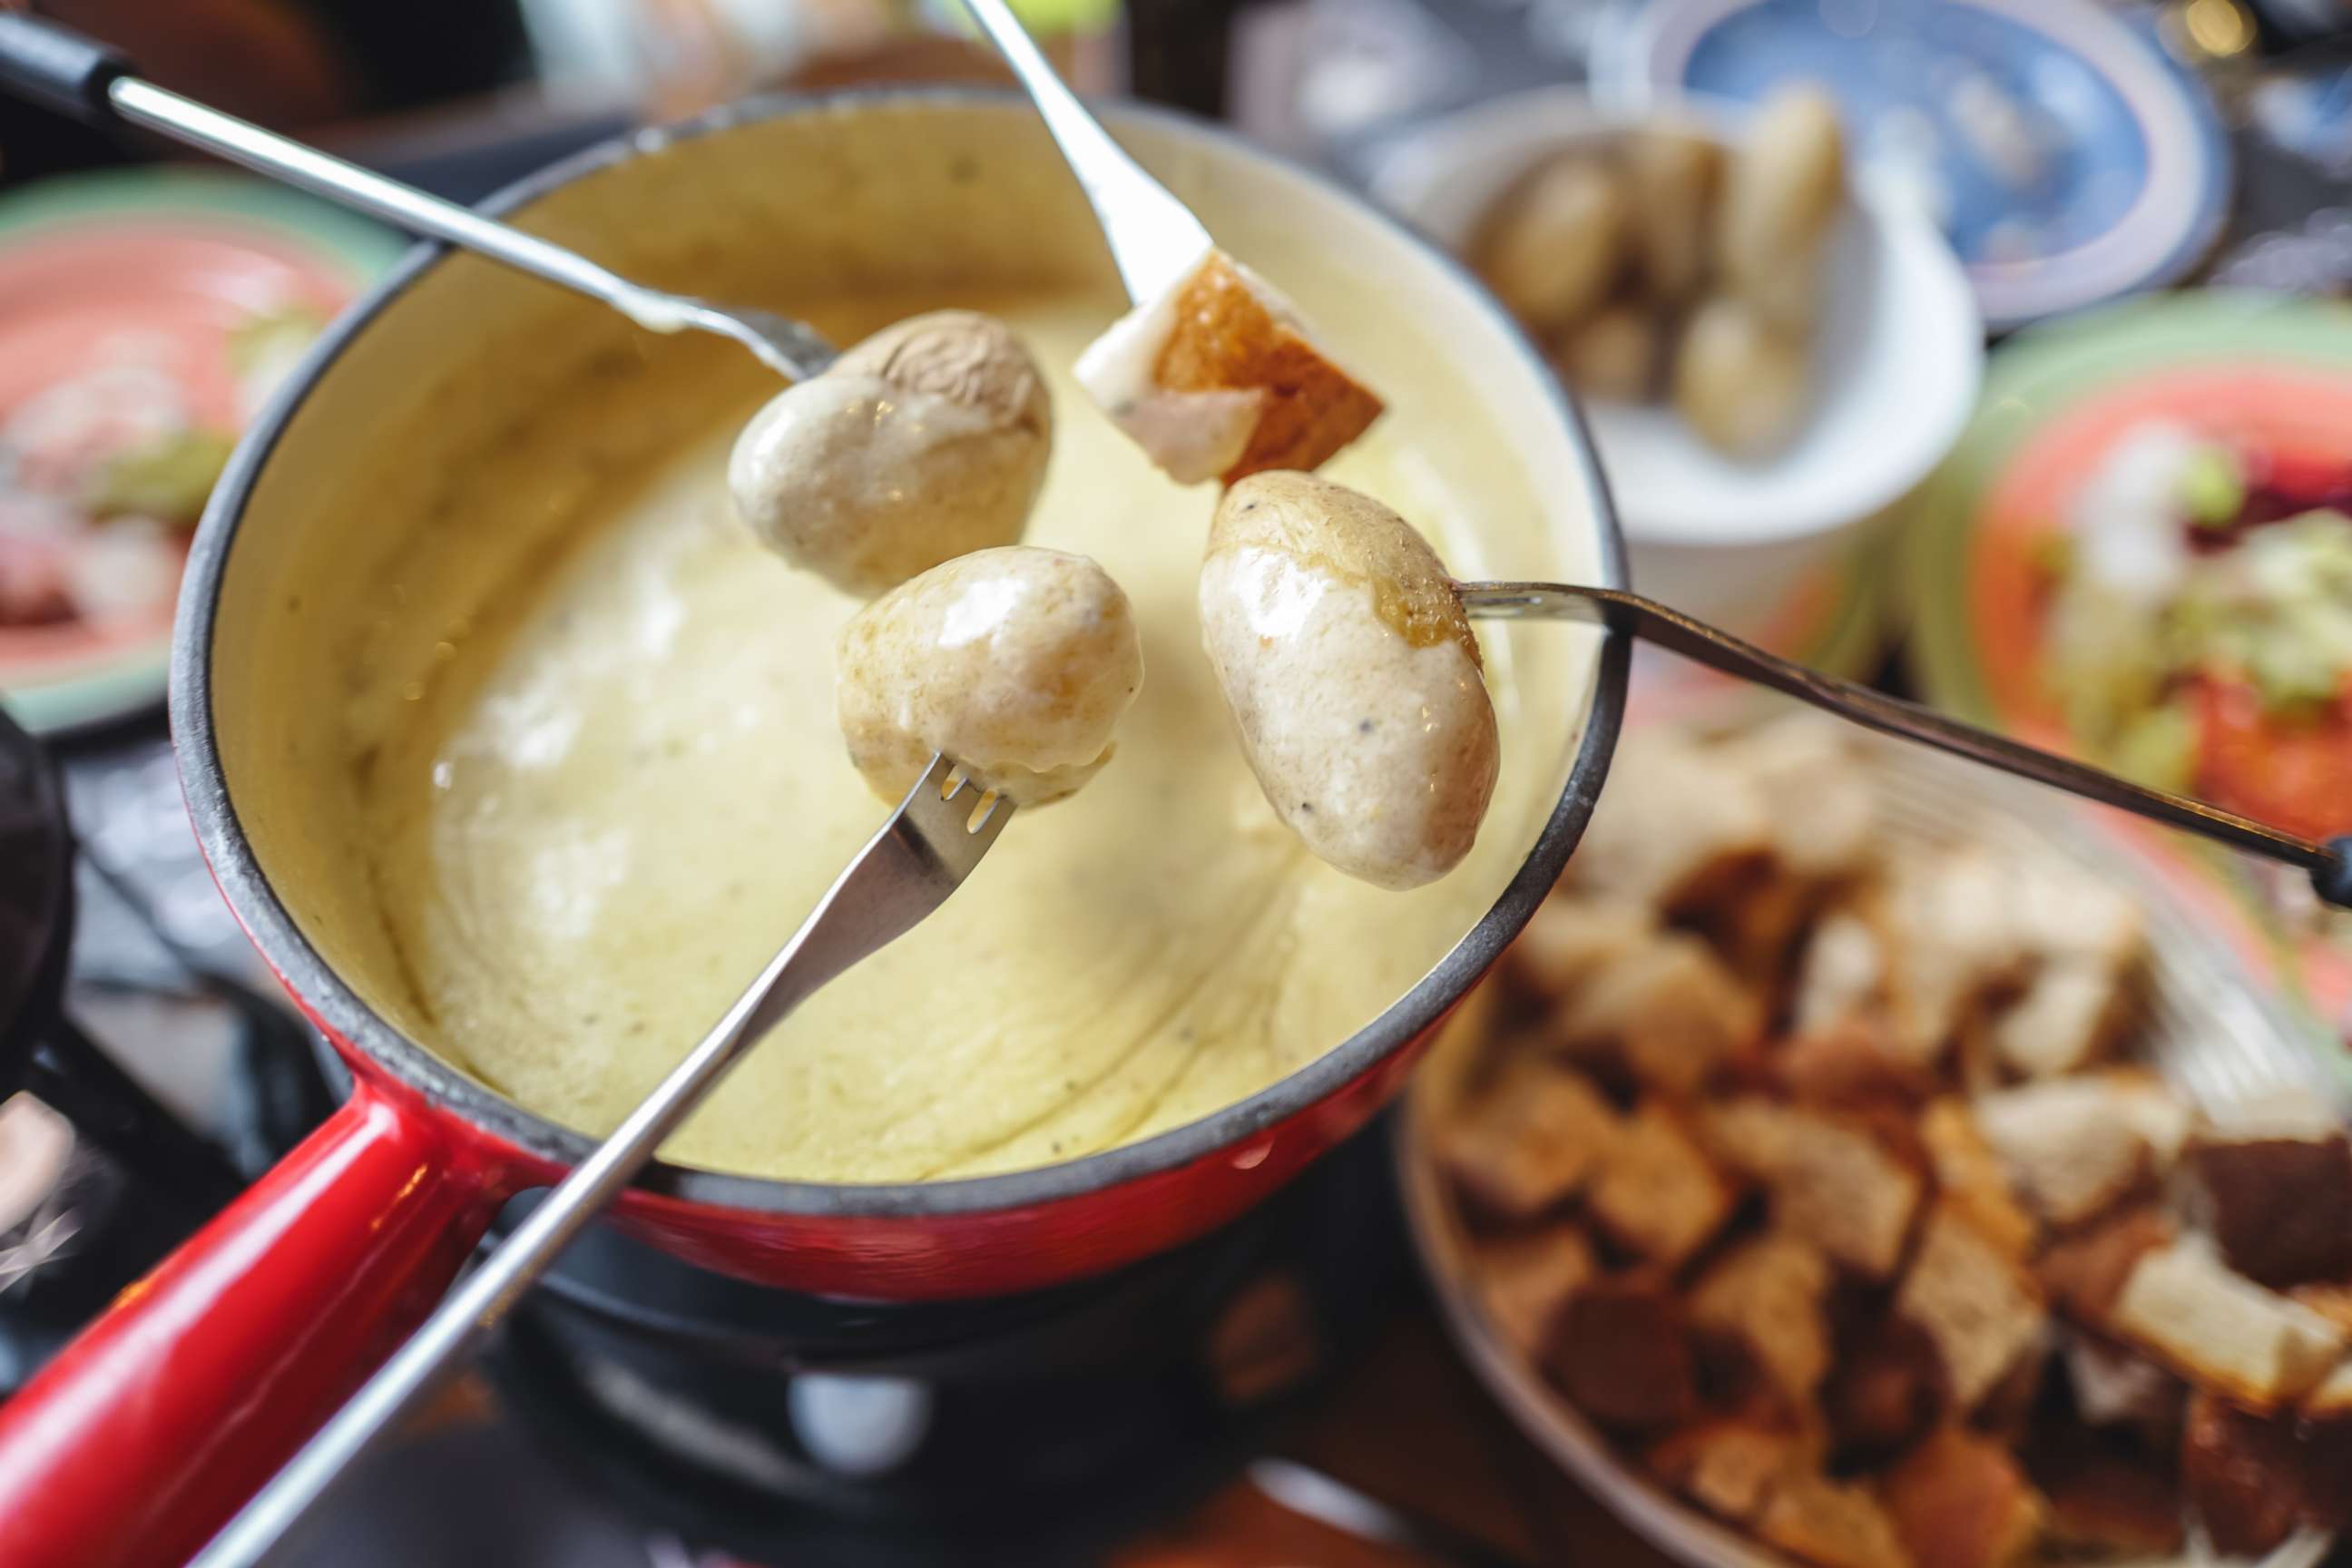 PHOTO: Swiss cheese fondue is served in an earthenware pot.